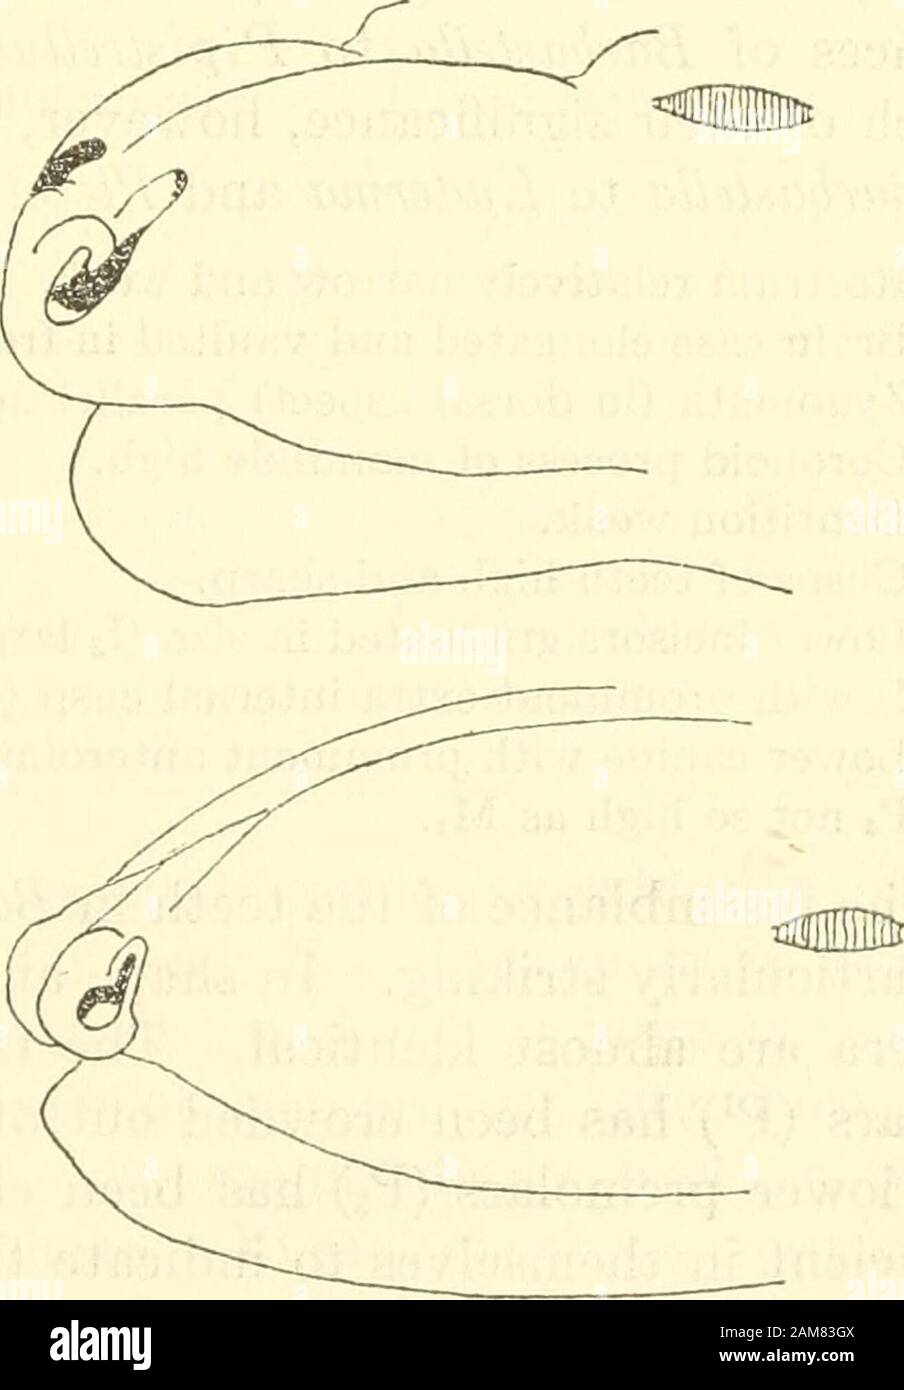 Proceedings of the United States National Museum . PLECOTUS (PLECOTUS) AURITUSUSNM 86601 MYQTIS VELIFERUSNM 102472. Figure 7.—Muzzles of Plecotus, compared in anterolateral aspect with the muzzle ofMyotis, a generalized vespertilionid. Camera lucida sketches. 118 PROCEEDINGS OF THE NATIONAL MUSEUM vol. no Eptesicus are not suitable for such a comparison because of the prob-ability that they are polyphyletic aggregations, and not naturalgroups. Most of the other vespertilionine genera are either monotypic,consist of slightly differentiated species, are of disputed validity, orare not sufficient Stock Photo